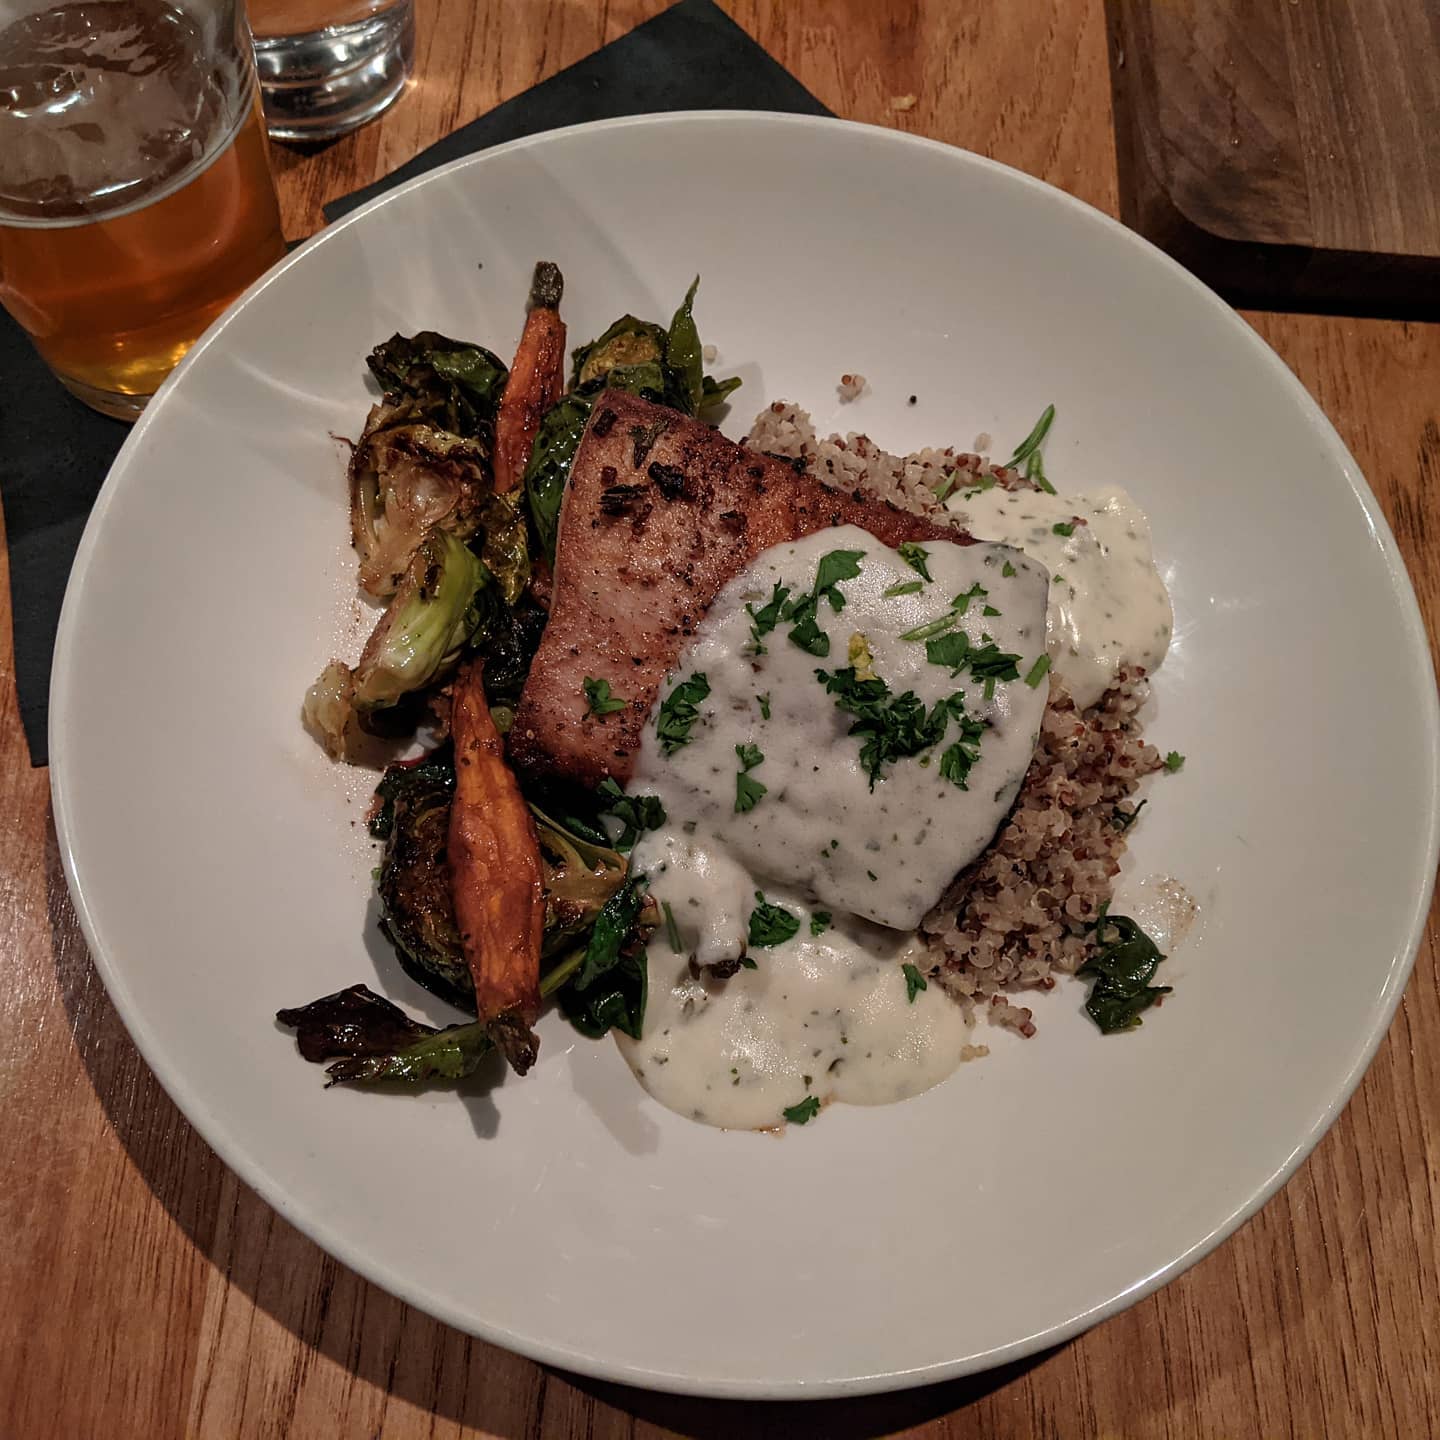 Traveling #foodporn in #tuscaloosa at The River restaurant overlooking the Black Warrior River. Mahi on a herbed Quinoa bed.And a local beer from Black Warrior Brewing as a side ðŸ¤£